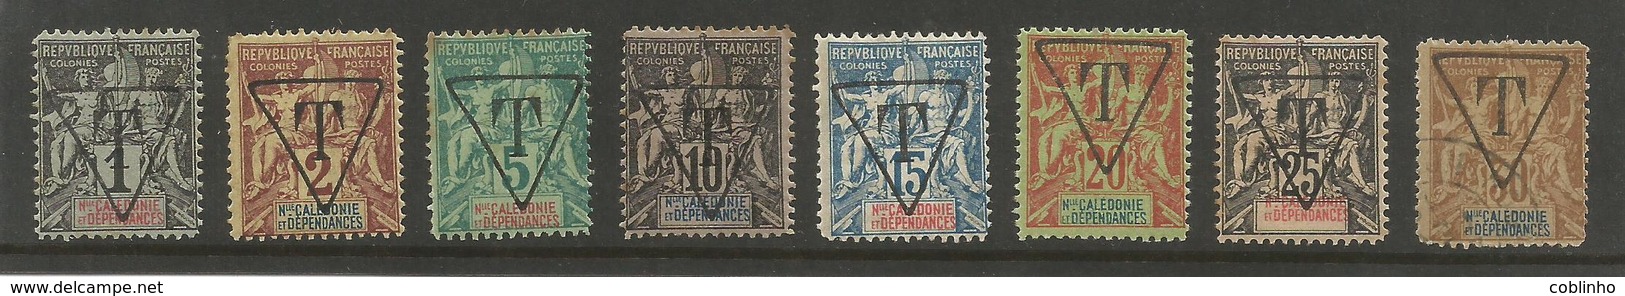 NOUVELLE CALEDONIE (New Caledonia) -  FAUX FOUNIER Taxe YT 1 - 6 */obl (Fournier Forgeries Hinged/used) - Neufs